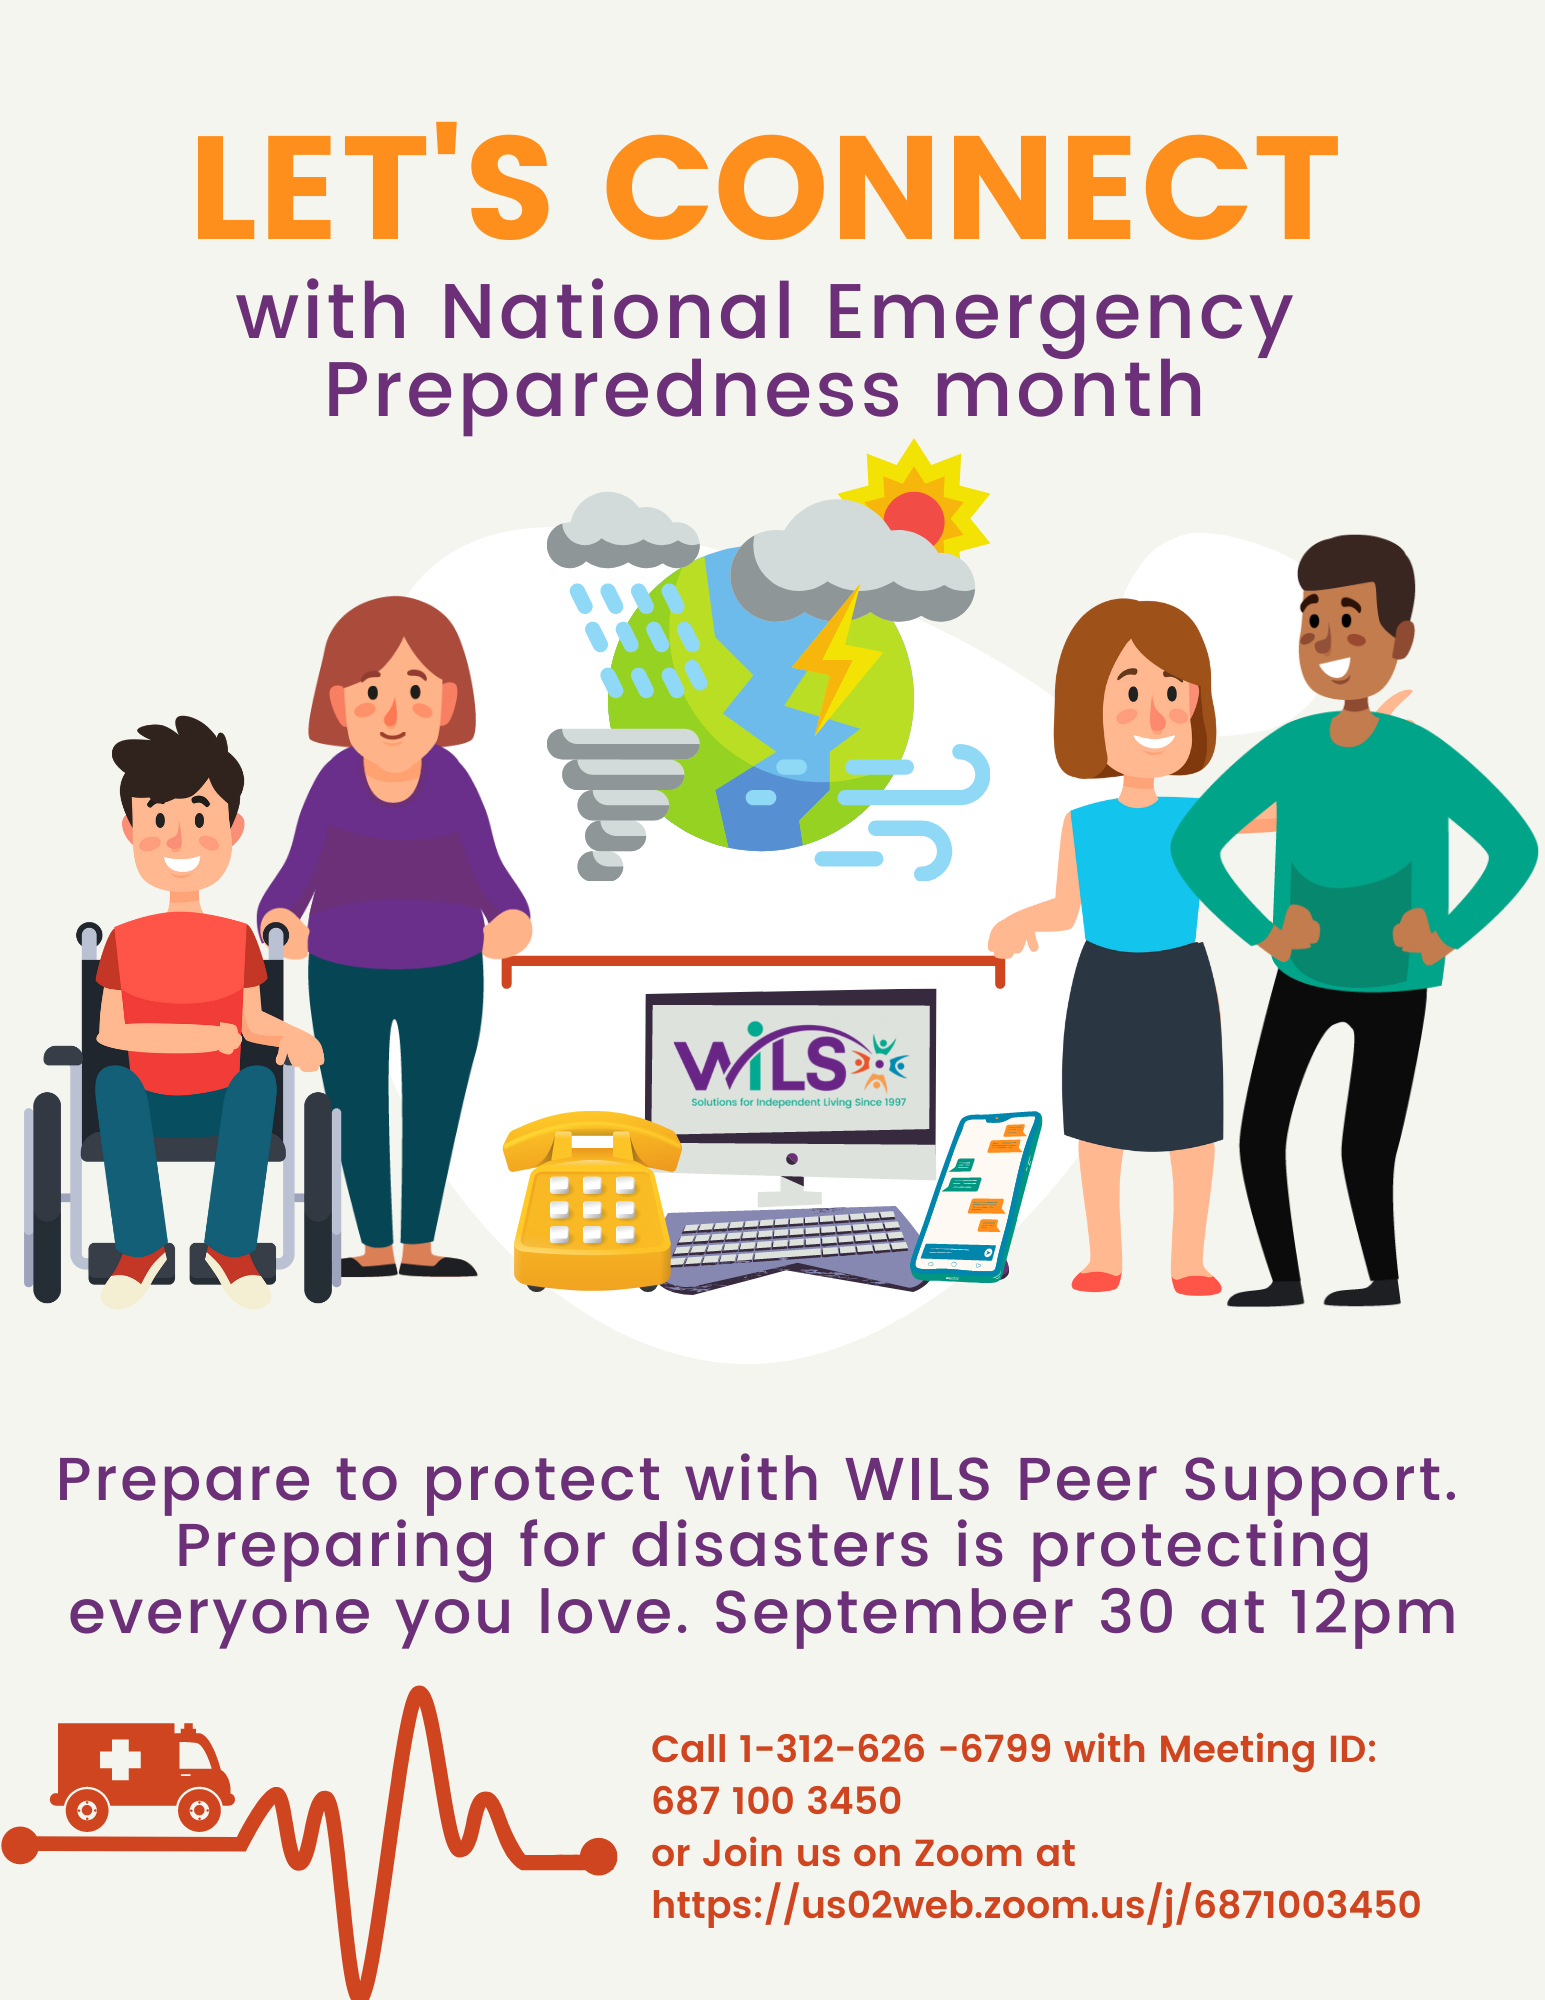 Let's Connect with National Emergency Preparedness month. Prepare to protect with WILS Peer Support.  Preparing for disasters is protecting everyone you love. September 30 at 12pm. Call 1-312-626 -6799 with Meeting ID: 687 100 3450 or Join us on Zoom at https://us02web.zoom.us/j/6871003450 